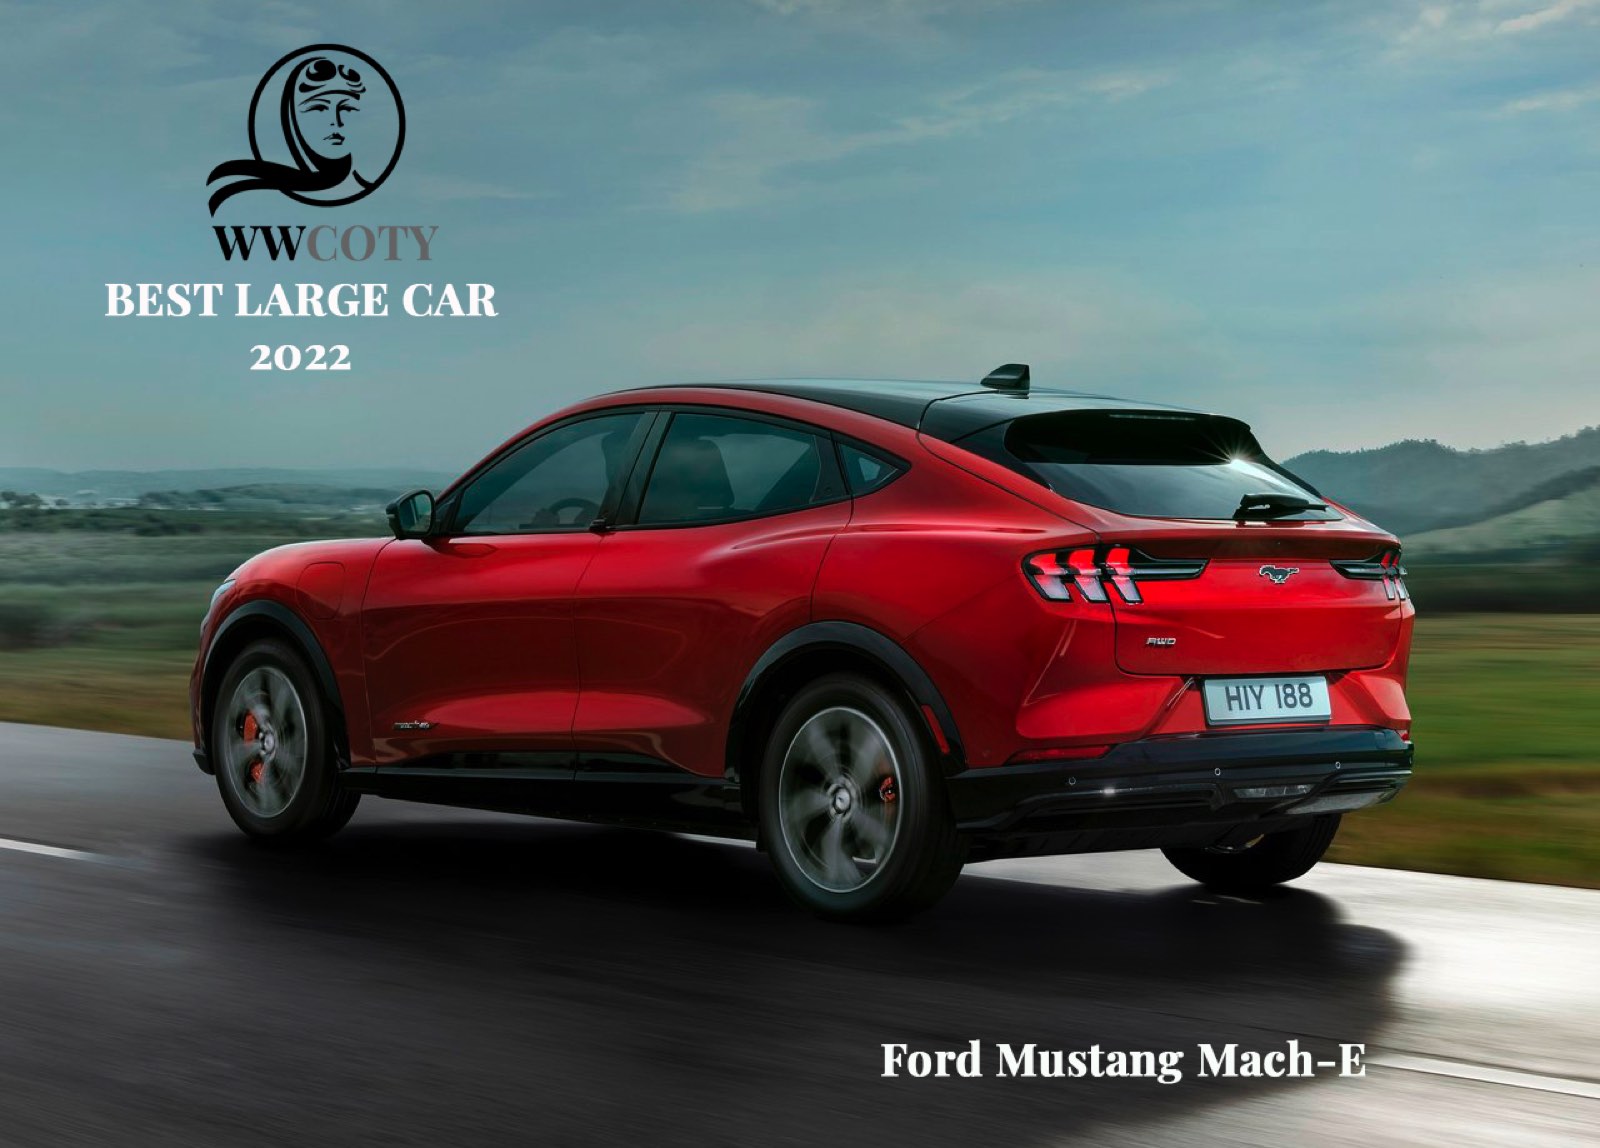 Ford Mustang Mach-E WWCOTY 2022